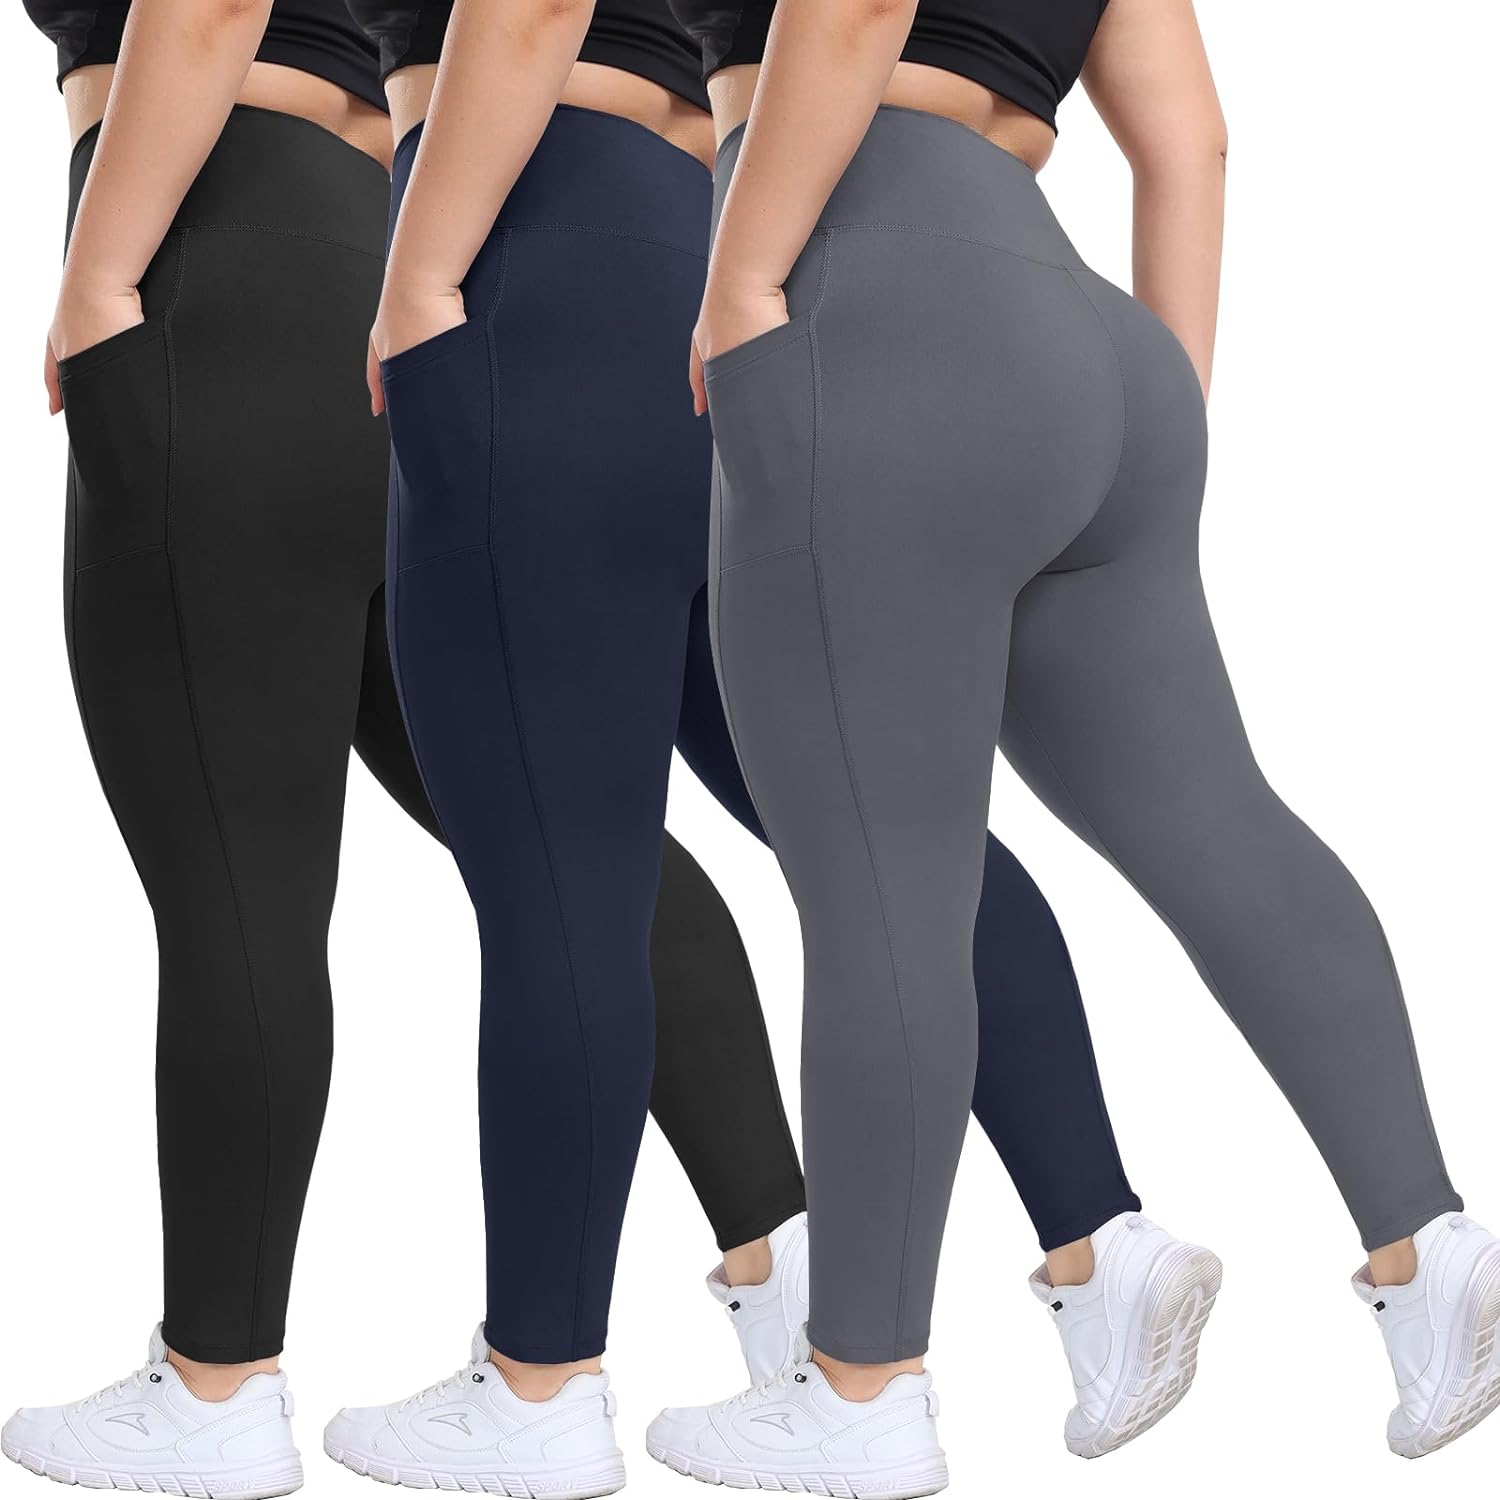 HLTPRO 3 Pack Plus Size Leggings with Pockets for Women - Black High Waisted Tummy Control Soft Yoga Pants for Gym Workout